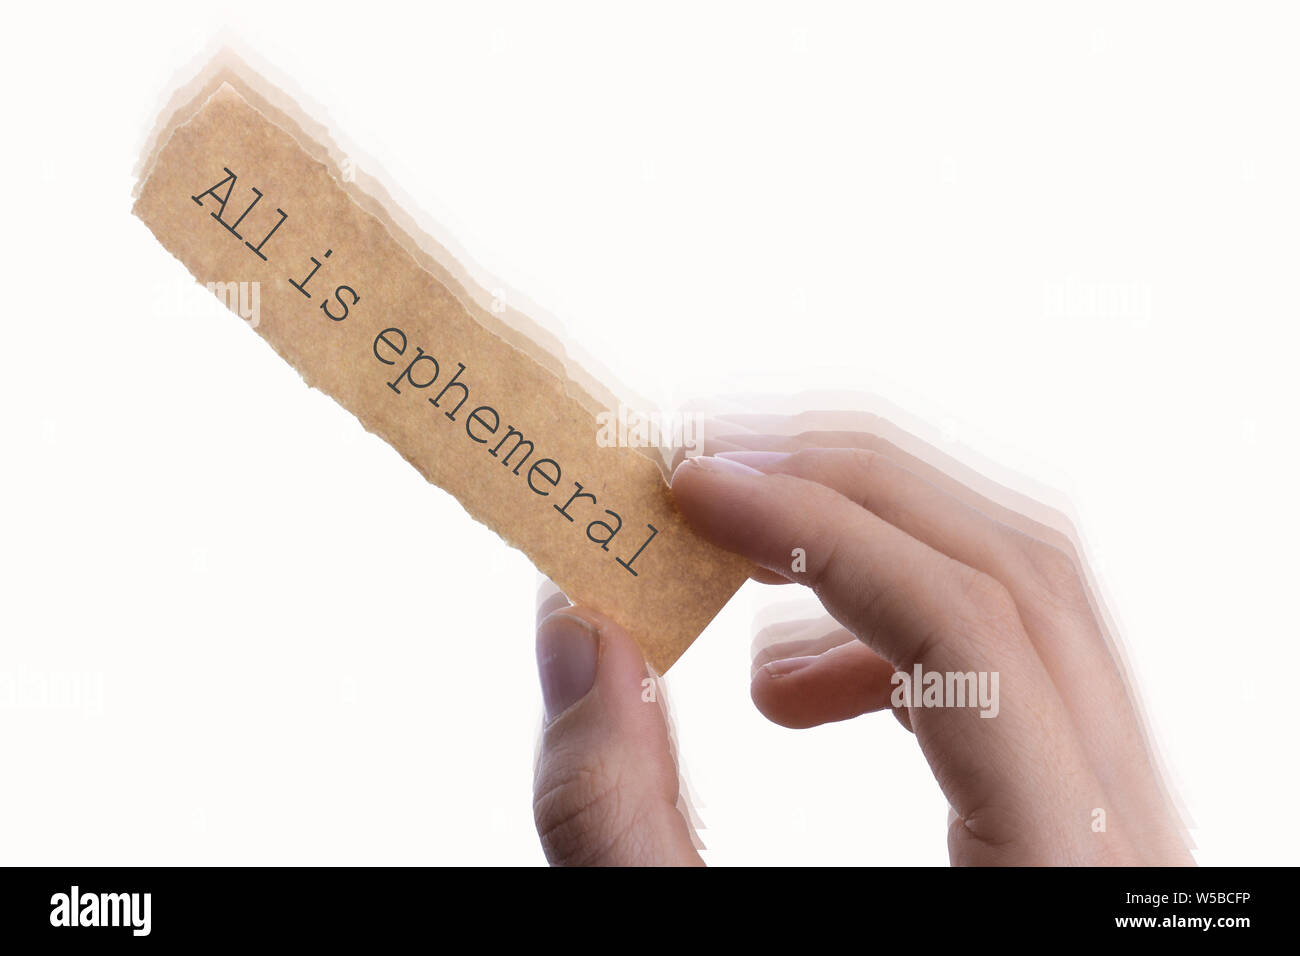 All is ephemeral wording written on torn notepaper in hand Stock Photo